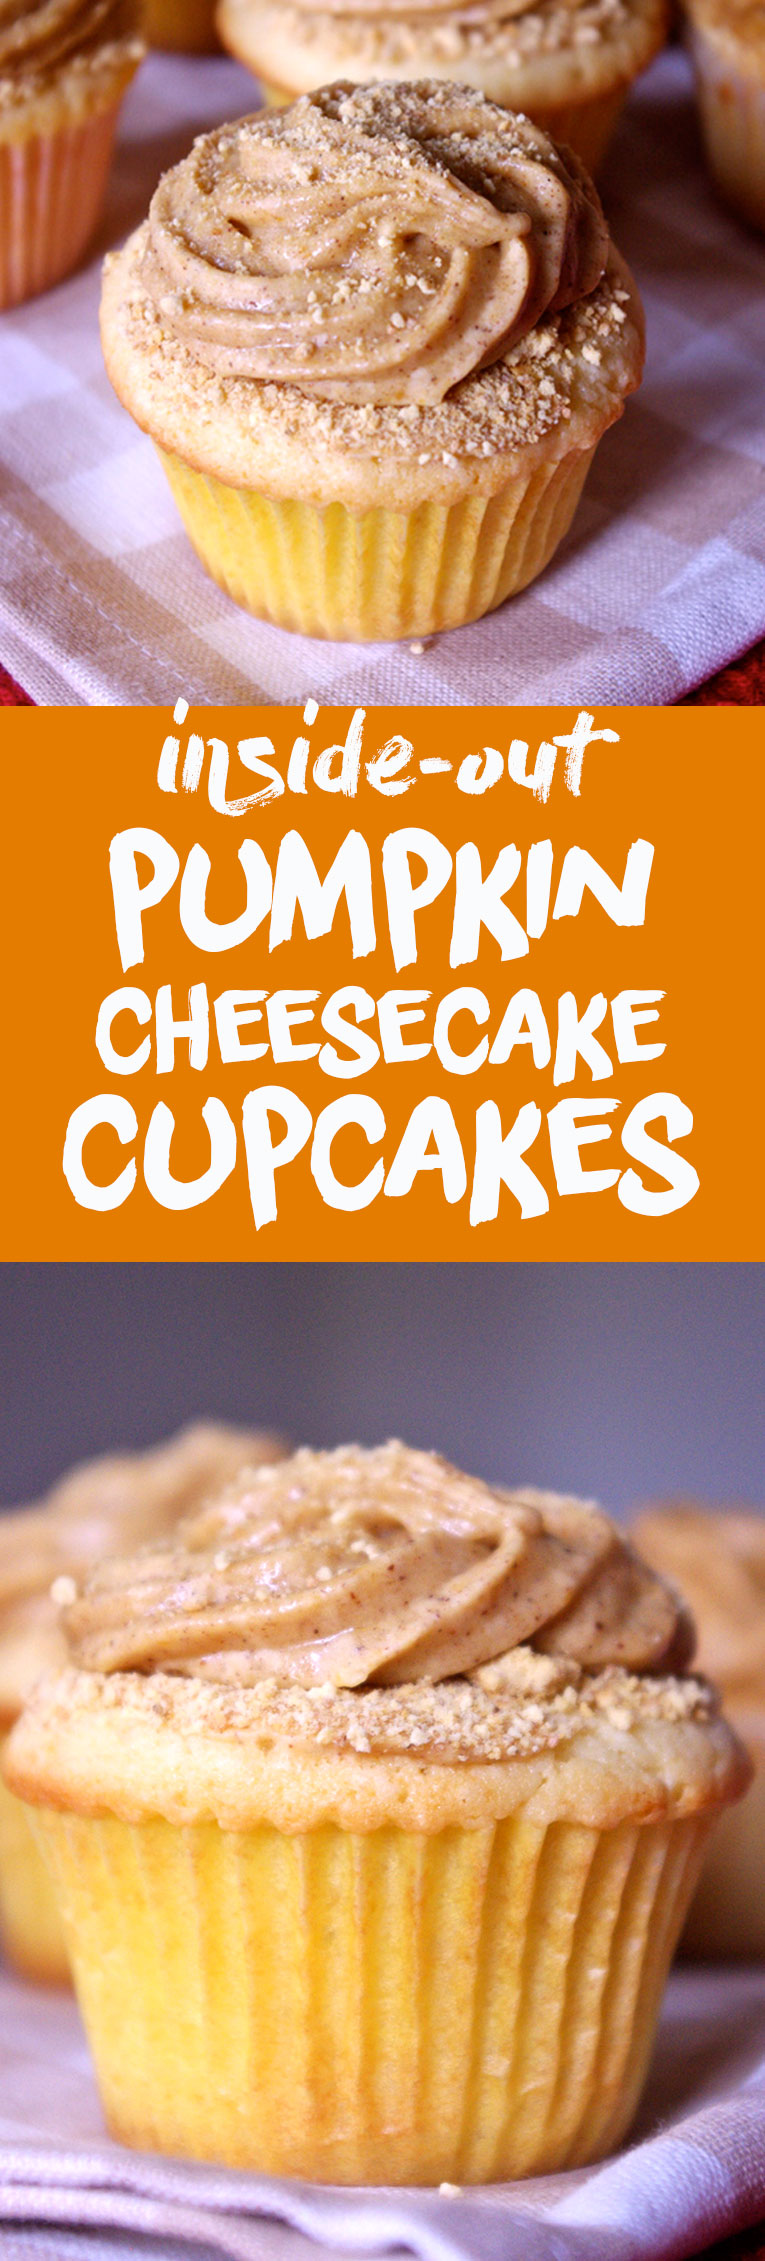 Reverse Pumpkin Cheesecake Cupcakes have a dense cheesecake cupcake with creamy pumpkin frosting and a sprinkle of graham cracker crumbs | www.thebatterthickens.com